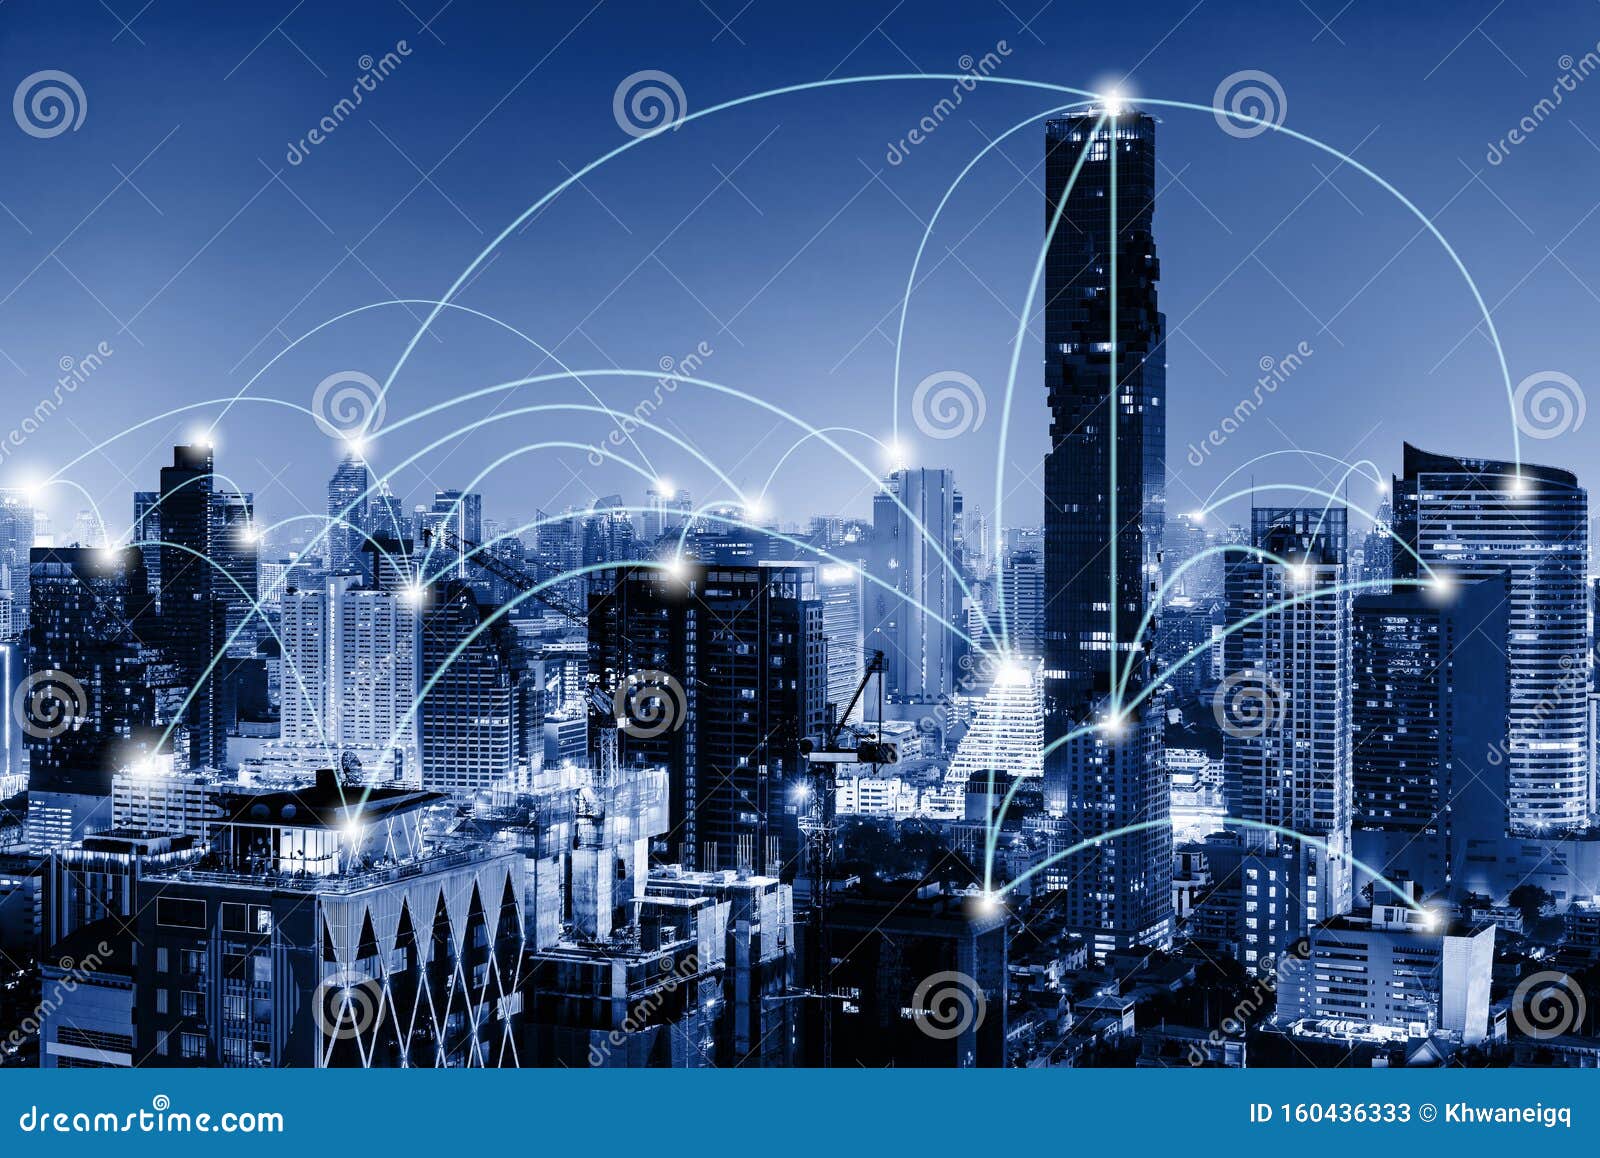 network telecommunication and communication connect concept, connection 5g networking system of infrastructure and cityscape at